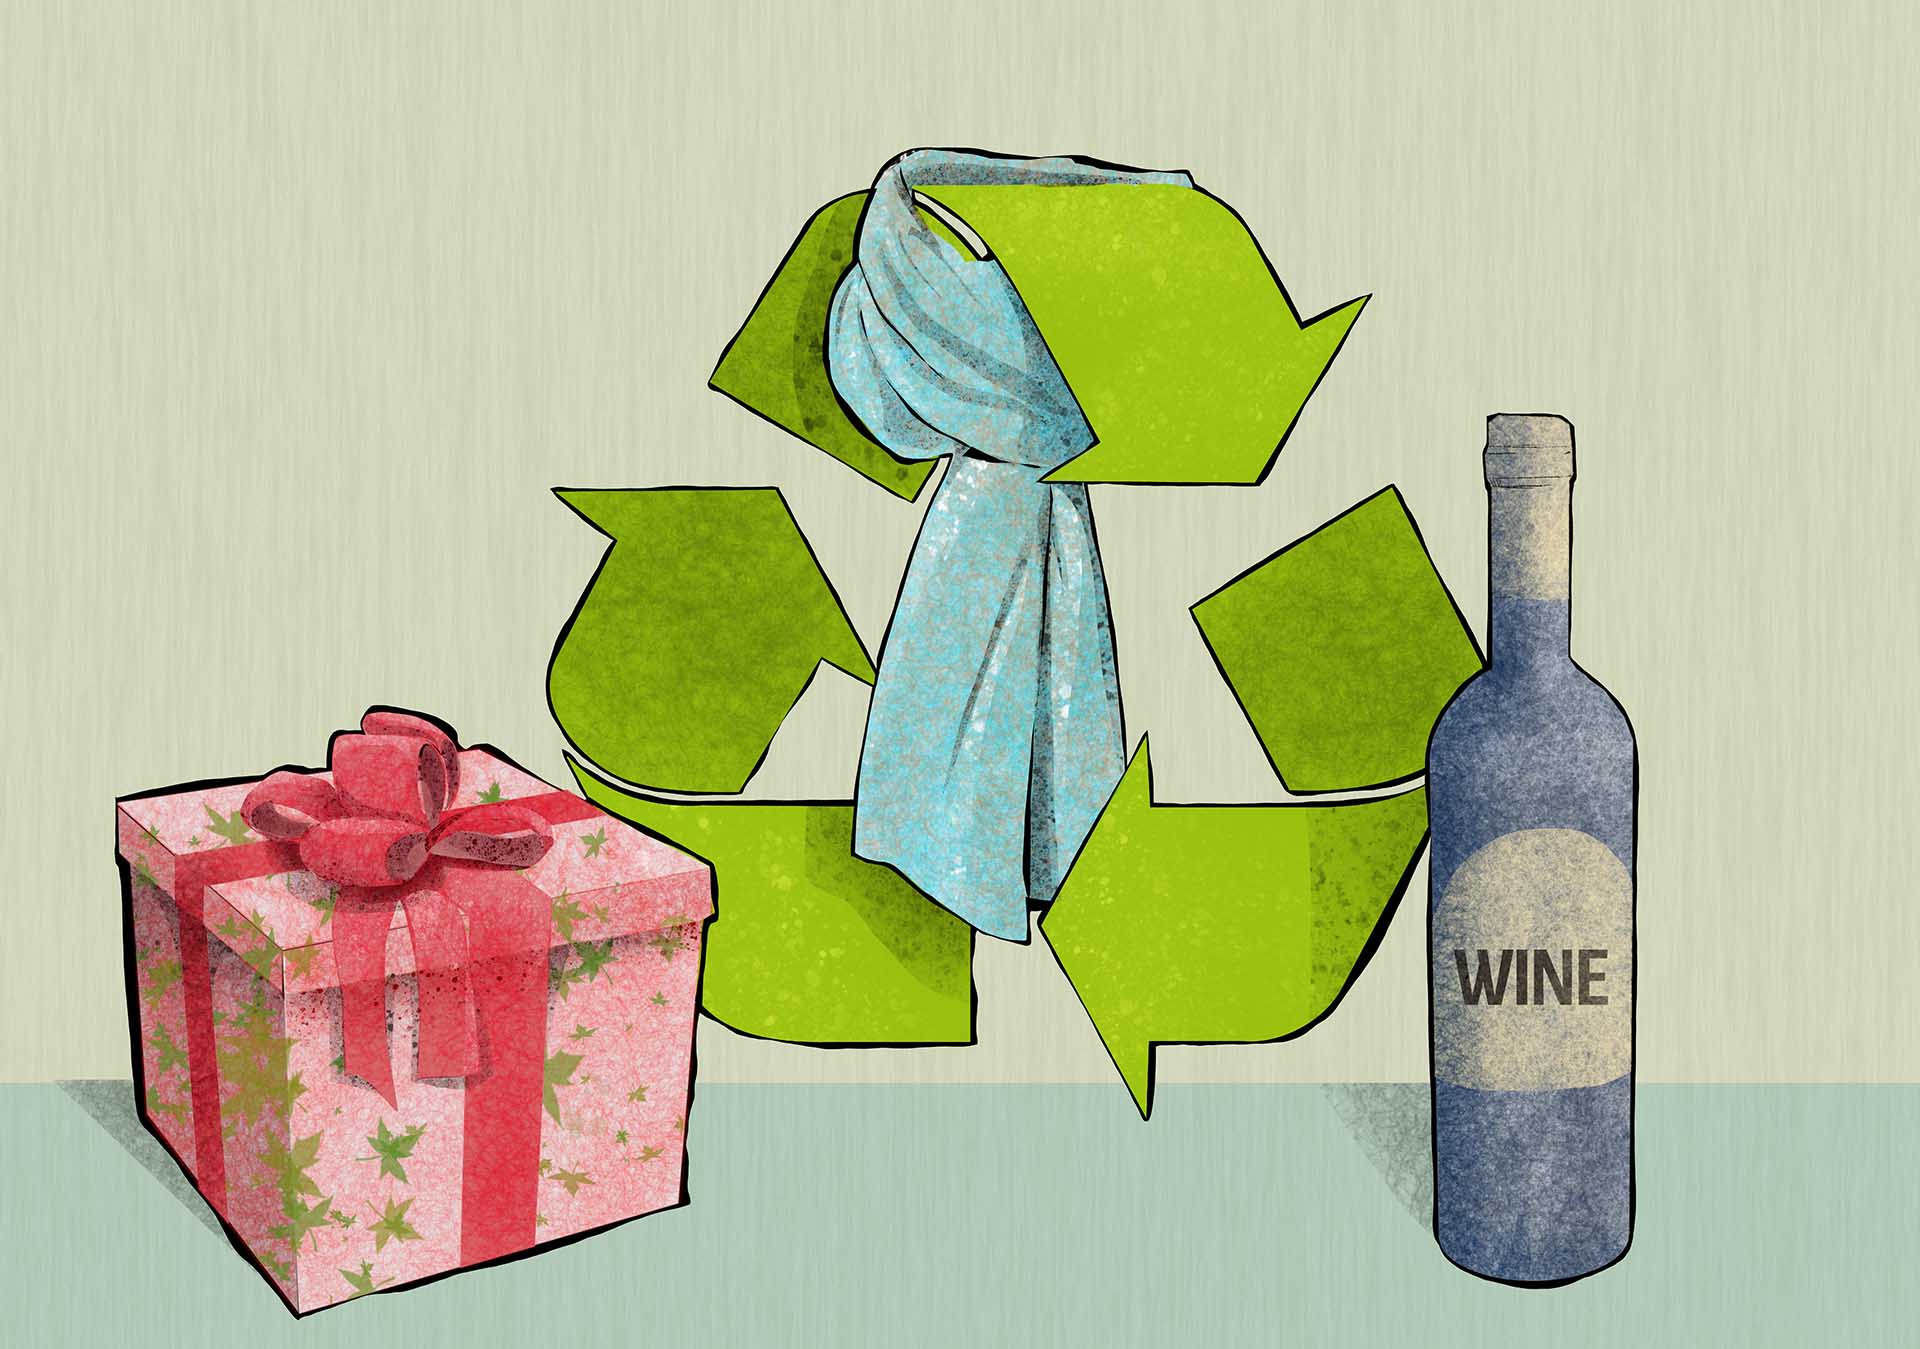 Illustration of gifts that can be recycled and reused